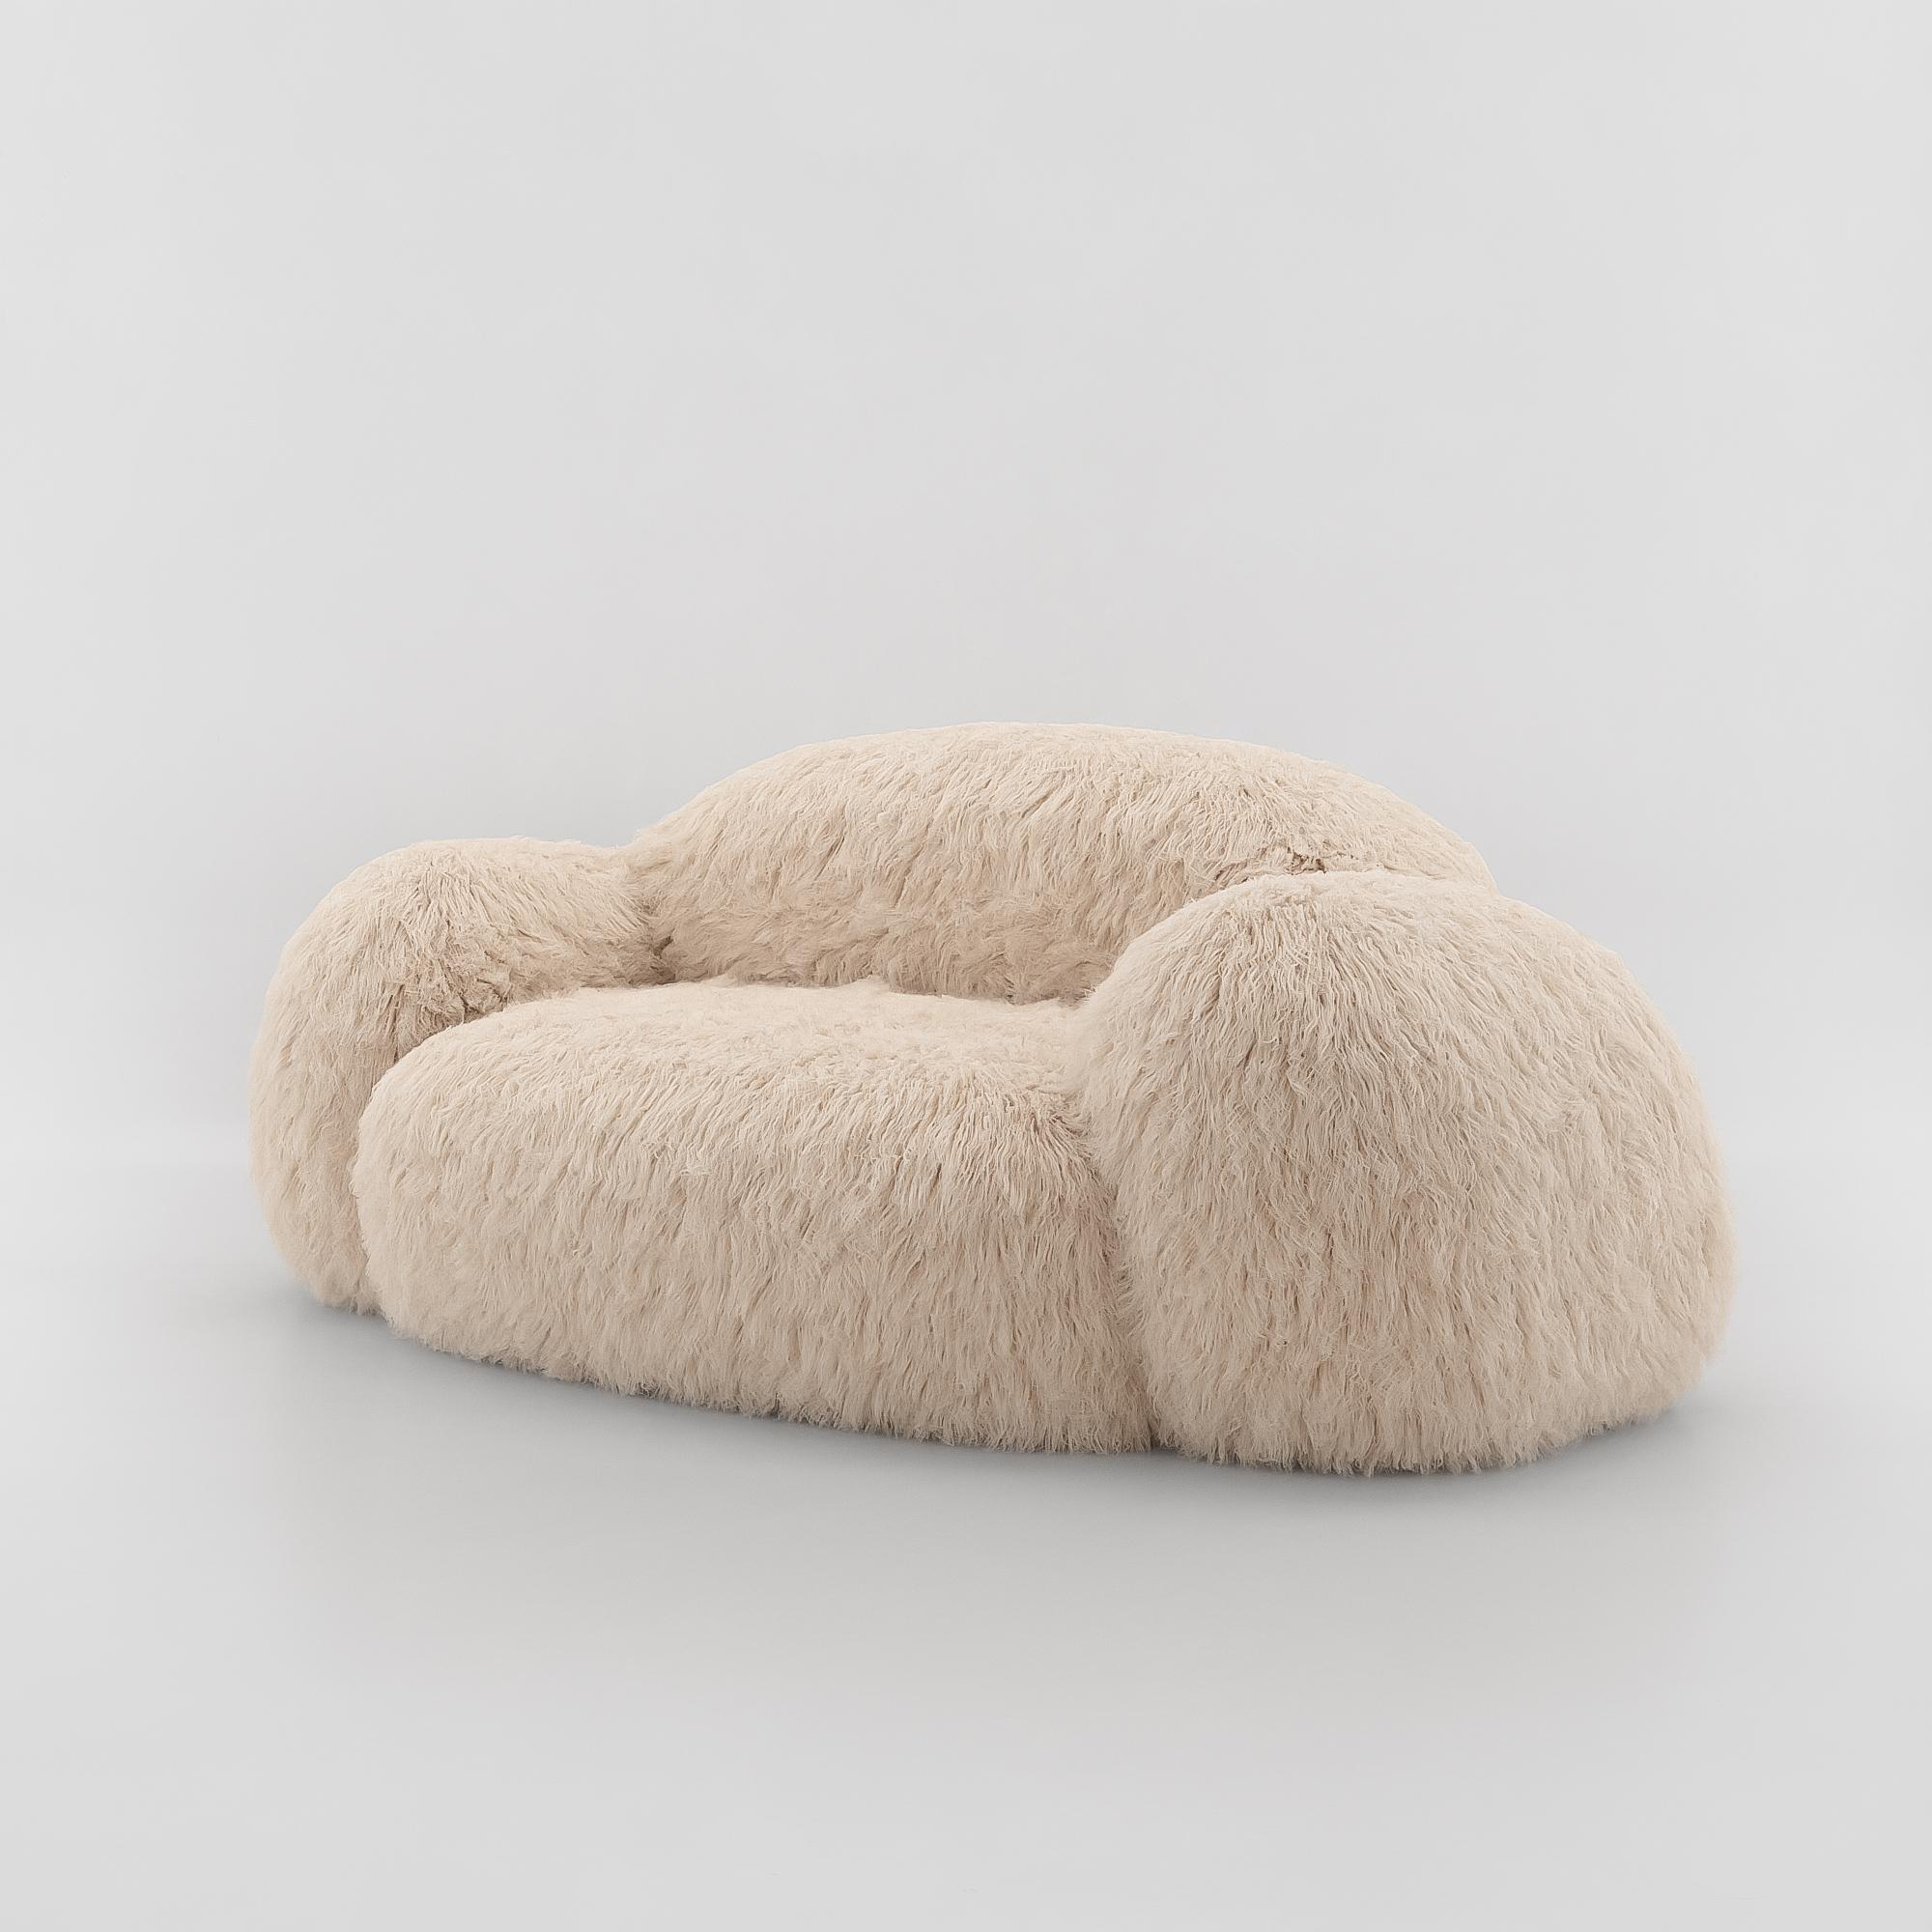 Yeti Sofa by Pepe Albargues
by Vladimir Naumov
Dimensions: H 82 x W 202 x L 110 cm
Materials: Faux lama fur

Mongolia fur for the Yeti collection available in pink, beige, black and lilac.

Technical Features
Pine wood structure, plywood and